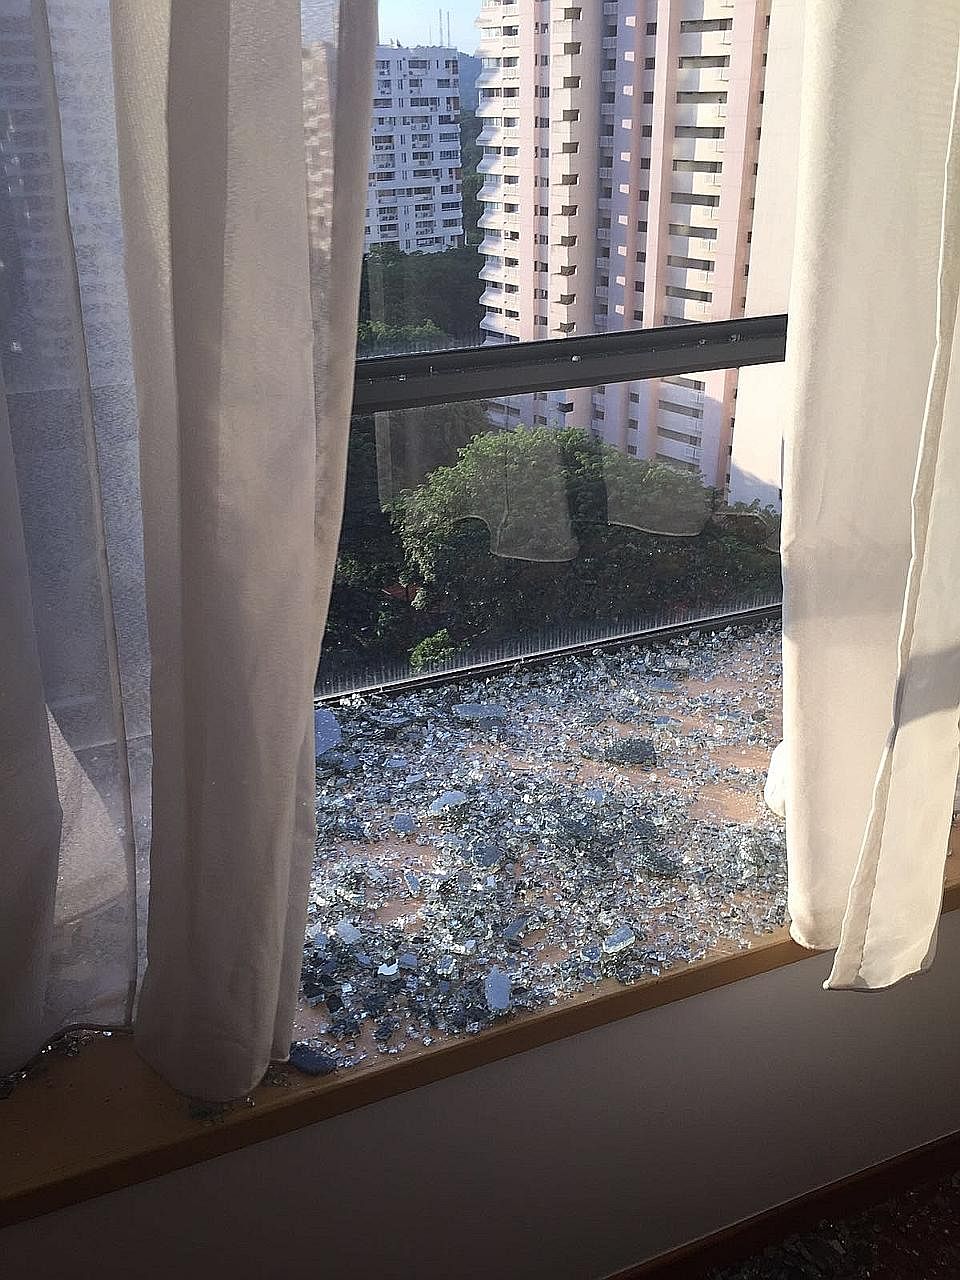 The shattered window at the home of Mr David. Over the past four years, BCA has received an average of 15 reports on glass shattering per year from a total of 25 condos.